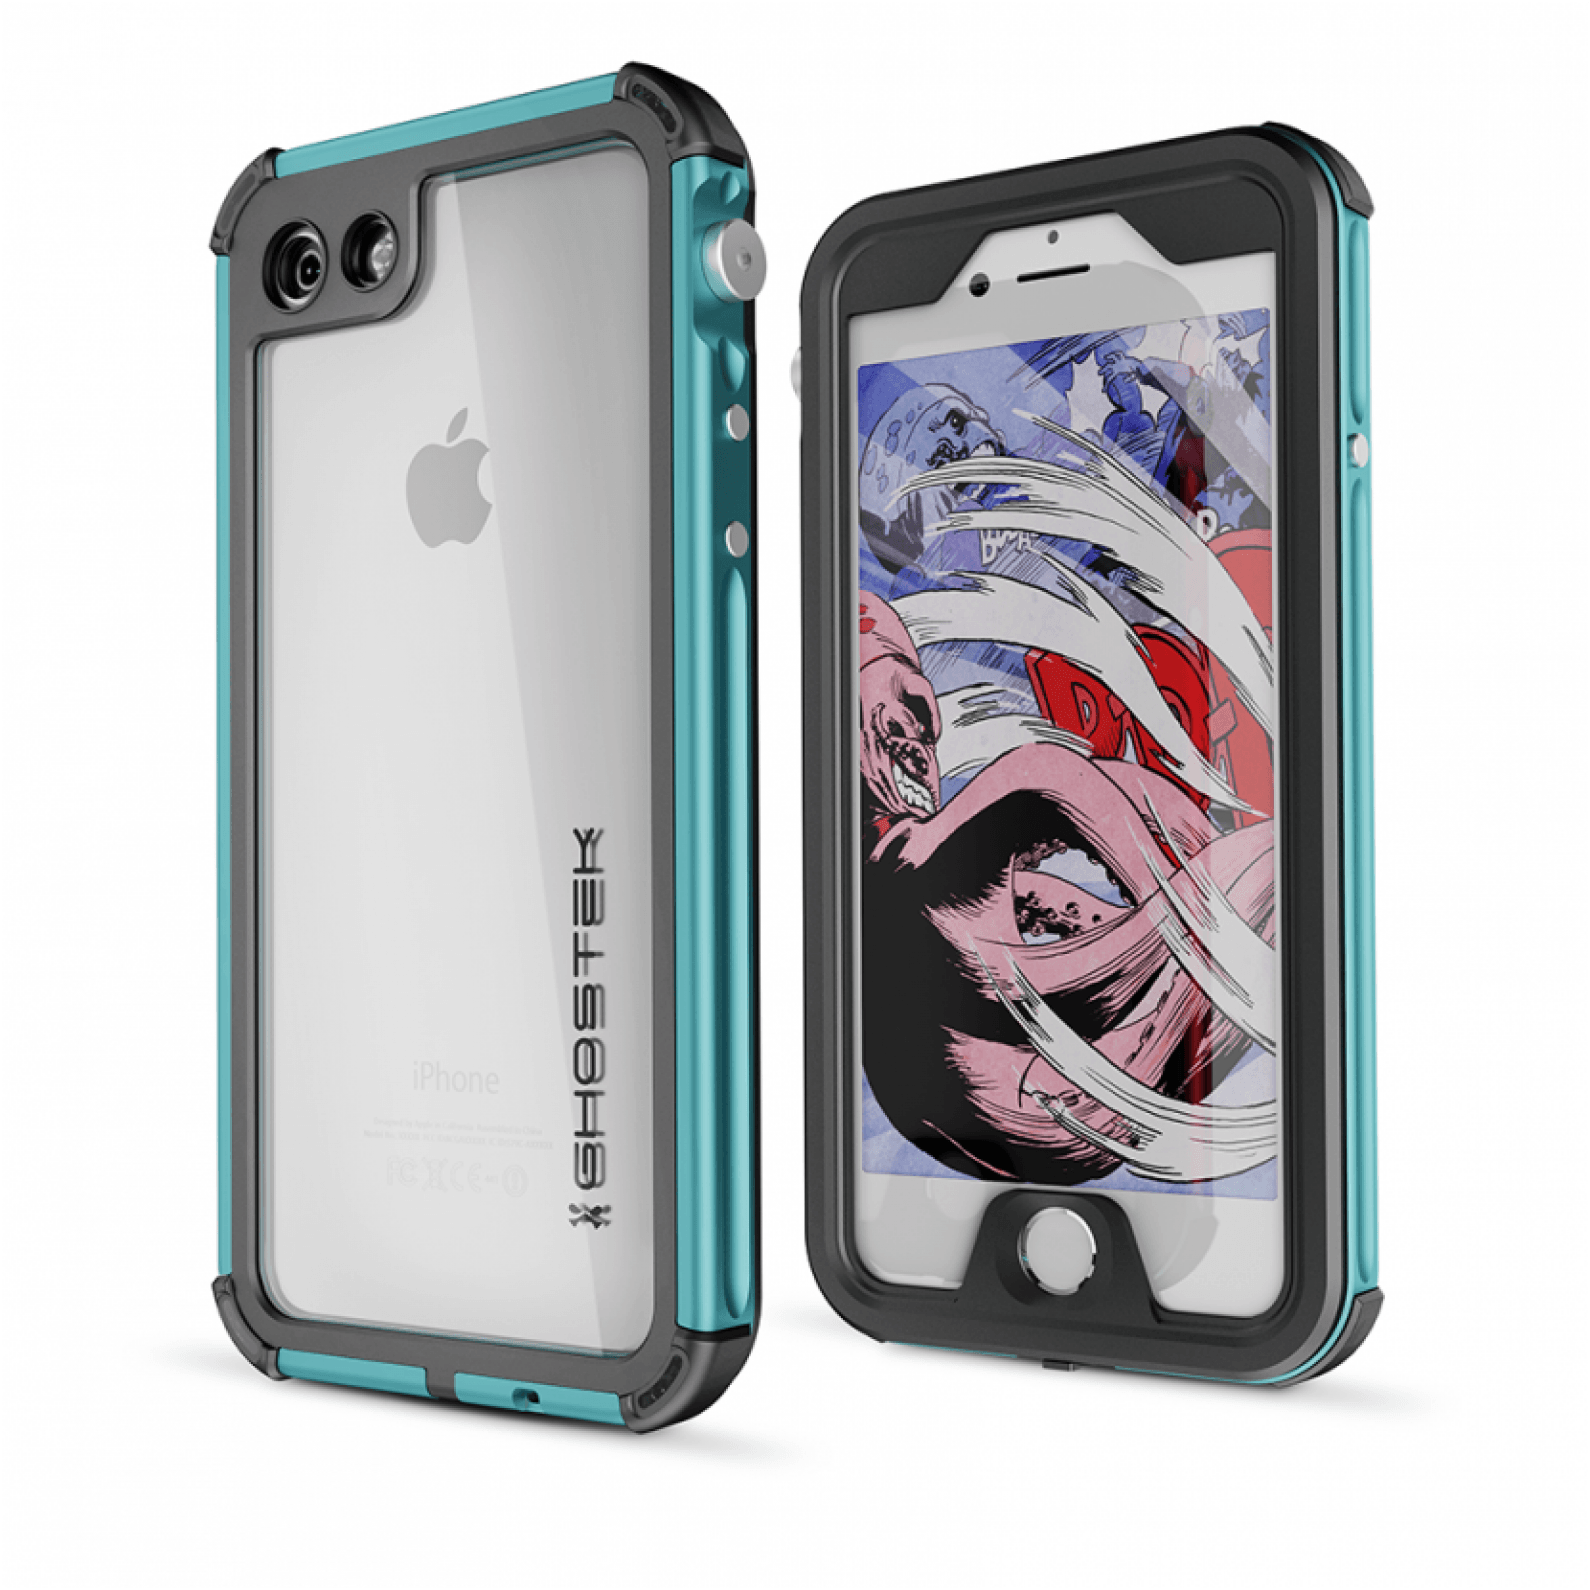 Waterproof Dirt Shockproof Protective Case Full Cover For Apple iPhone 7 7 PlR#5 